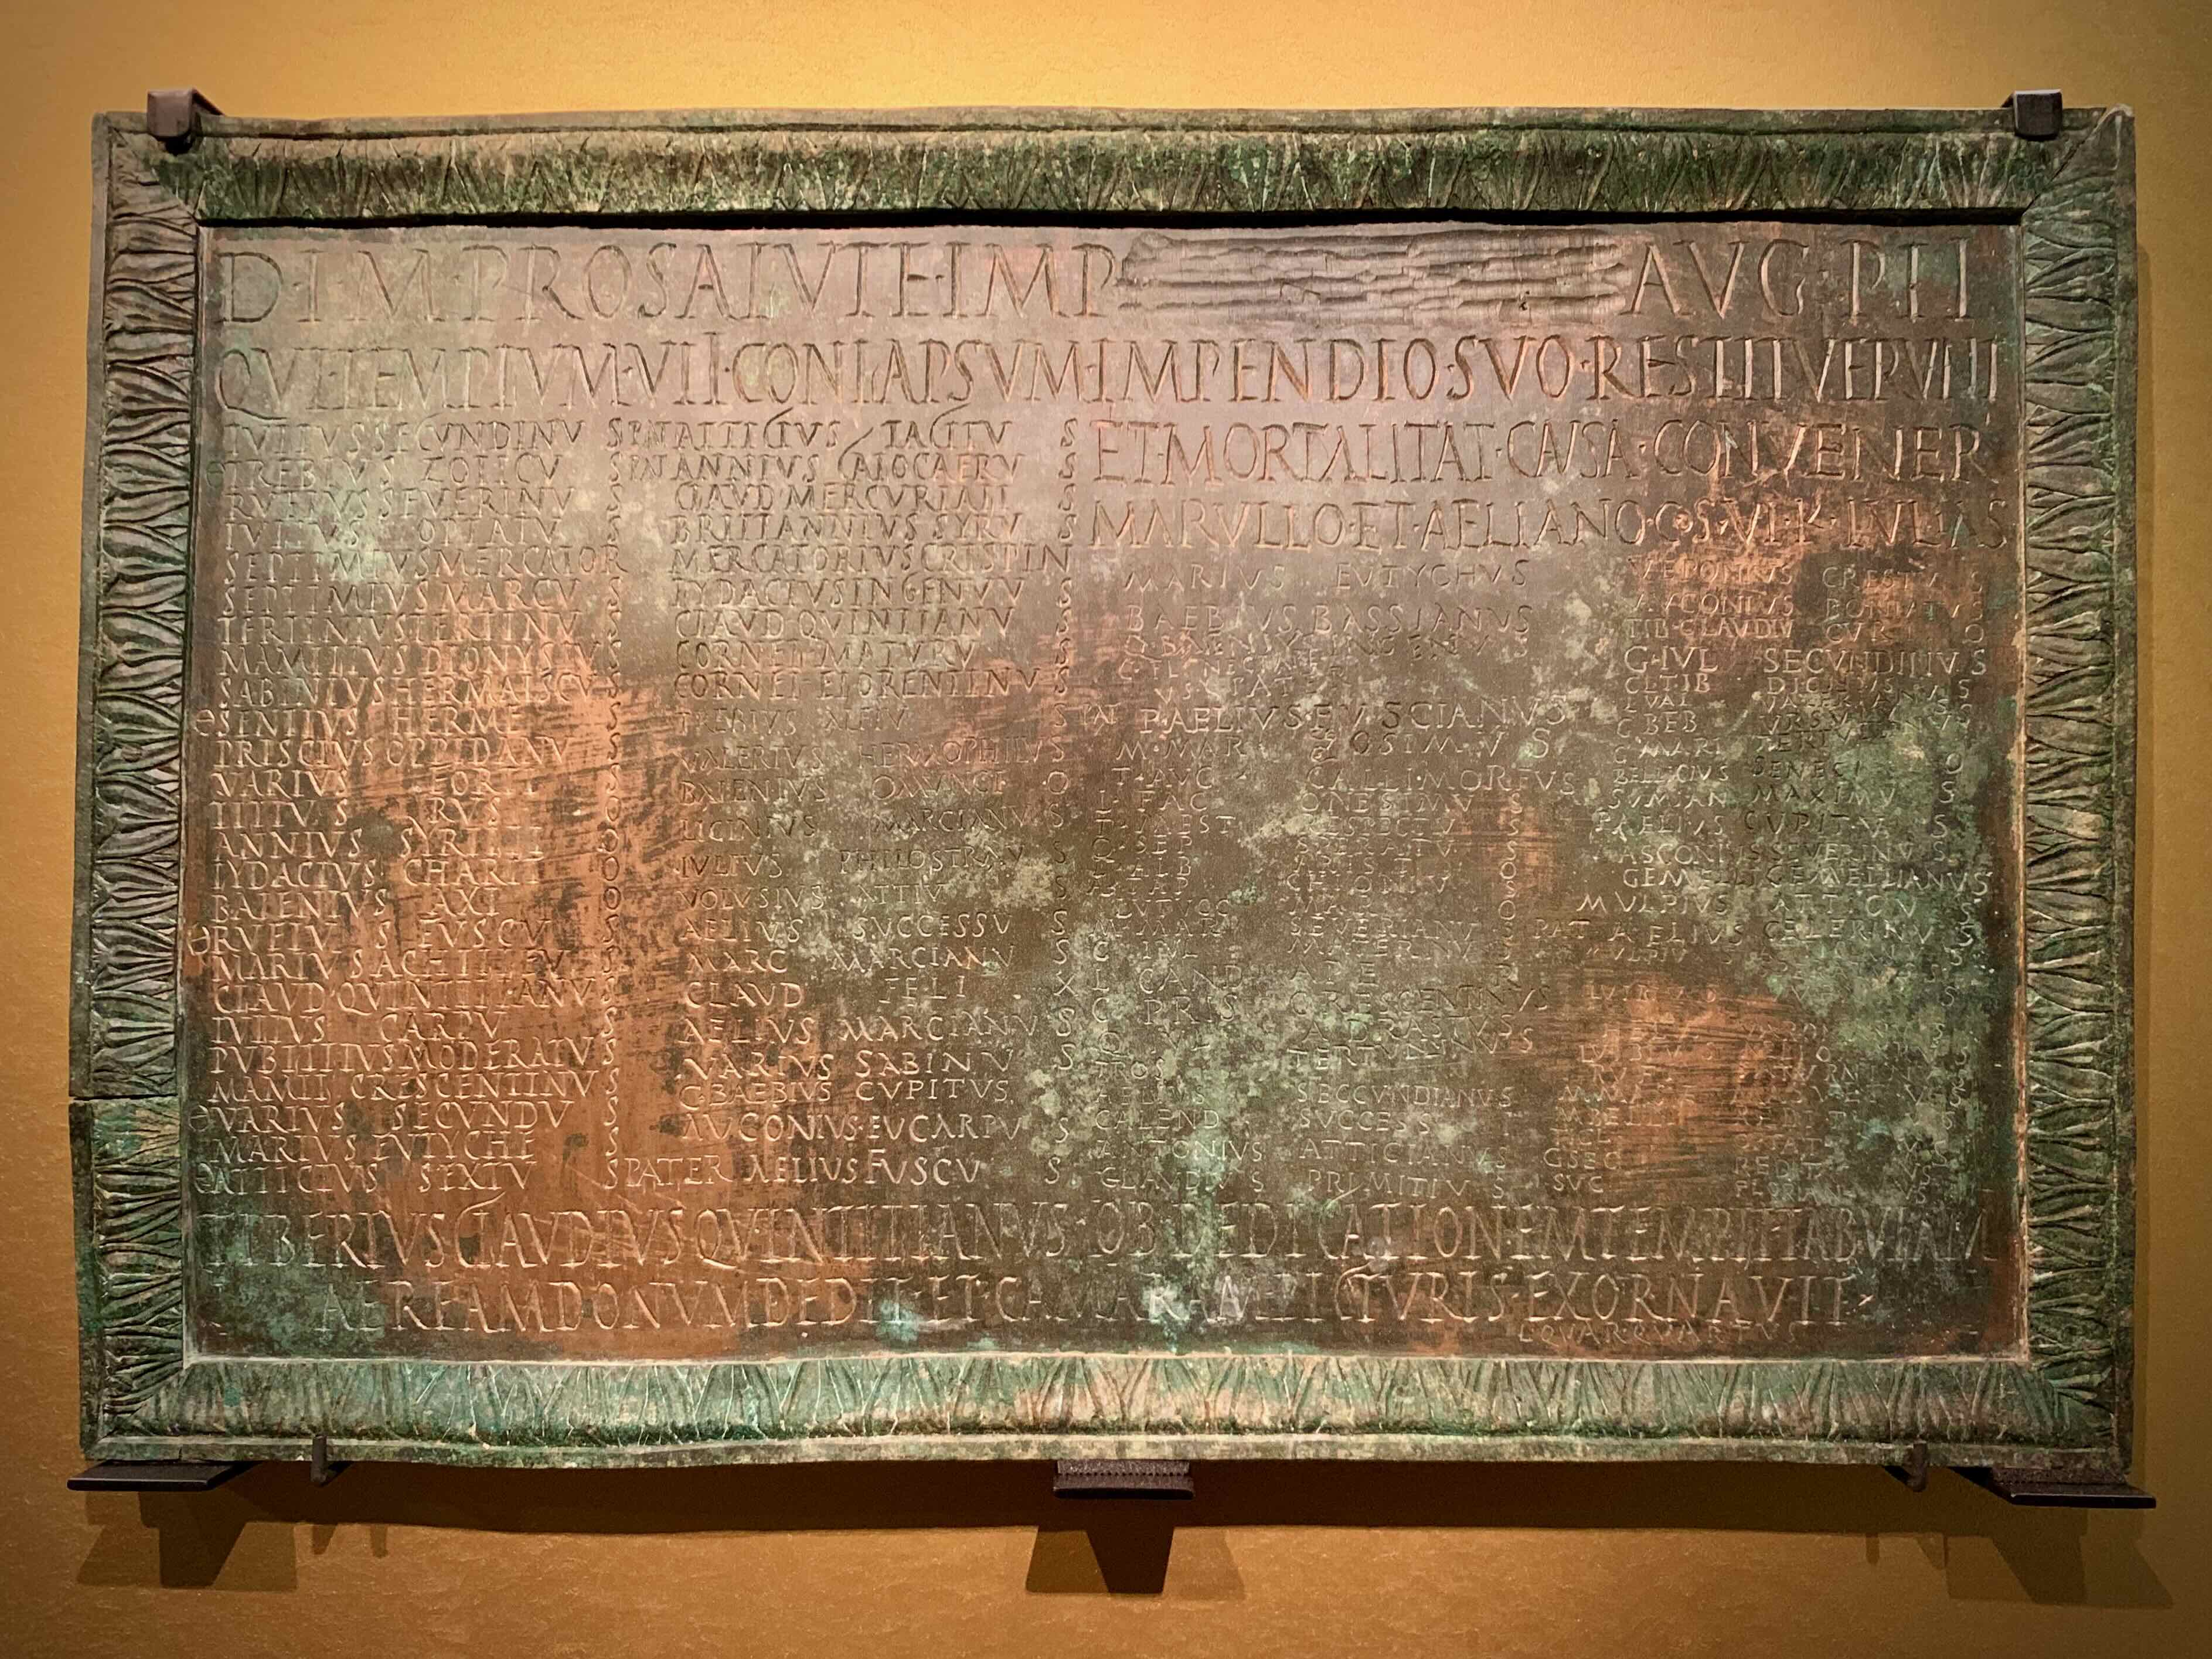 Plaque with list of Mithraic fellows from Virunum